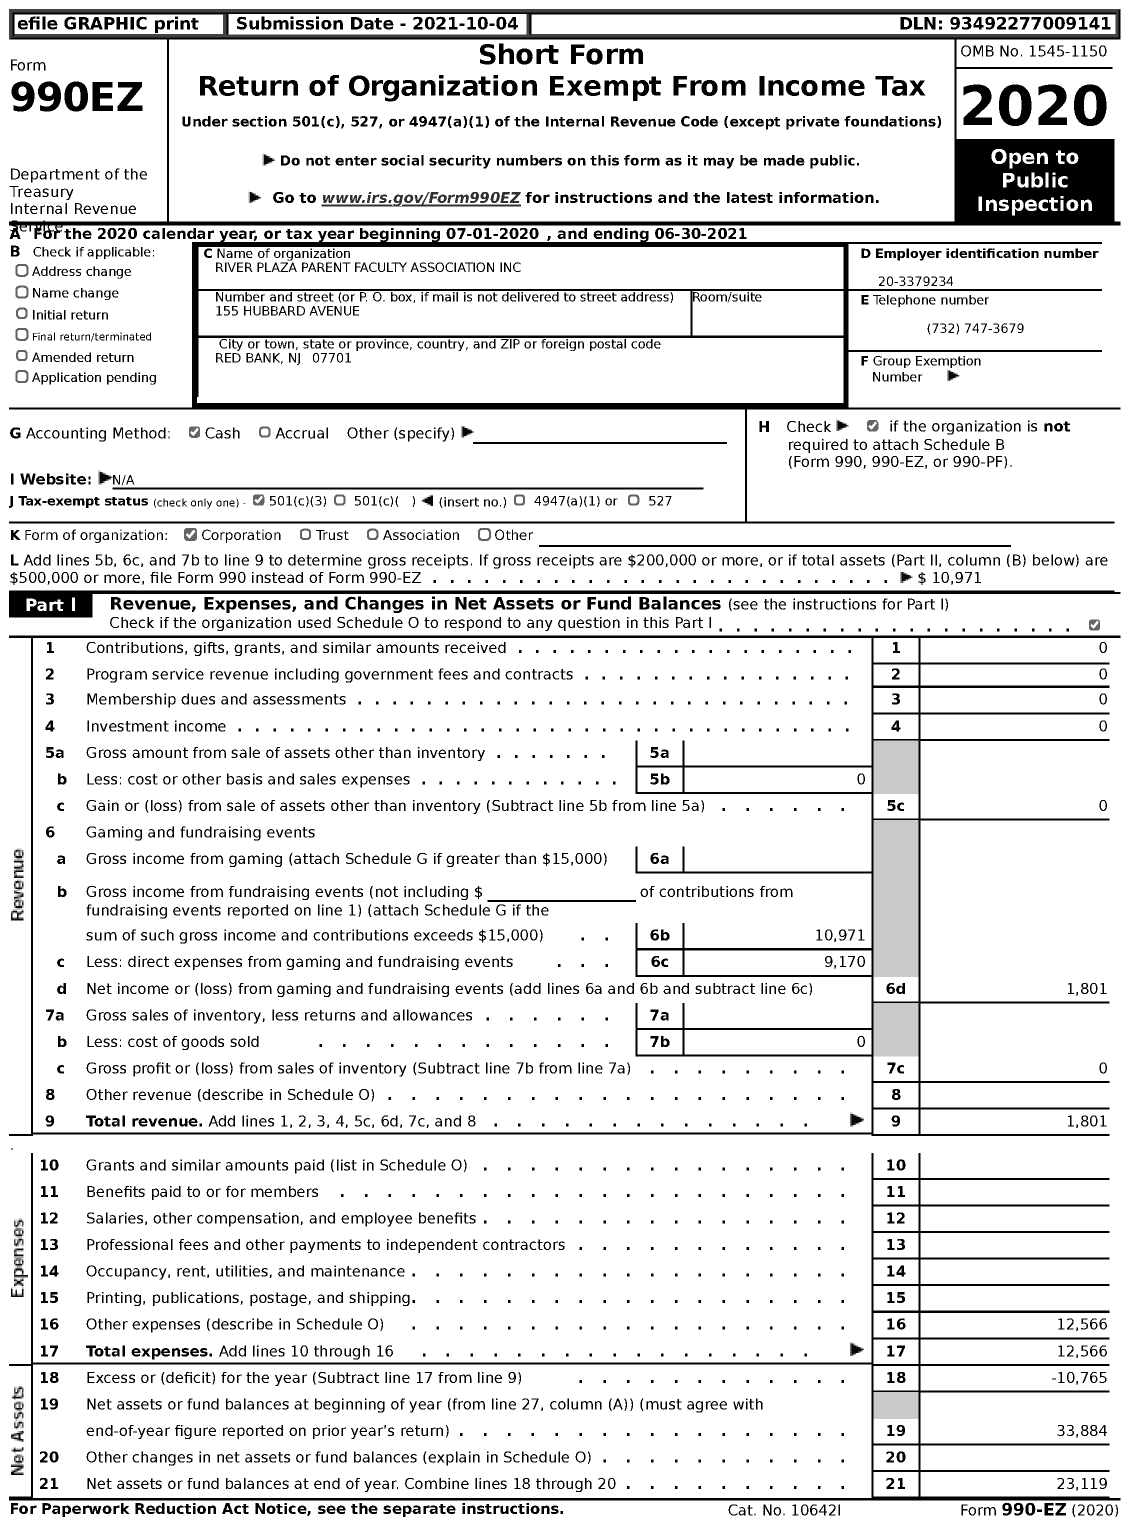 Image of first page of 2020 Form 990EZ for River Plaza Parent Faculty Association